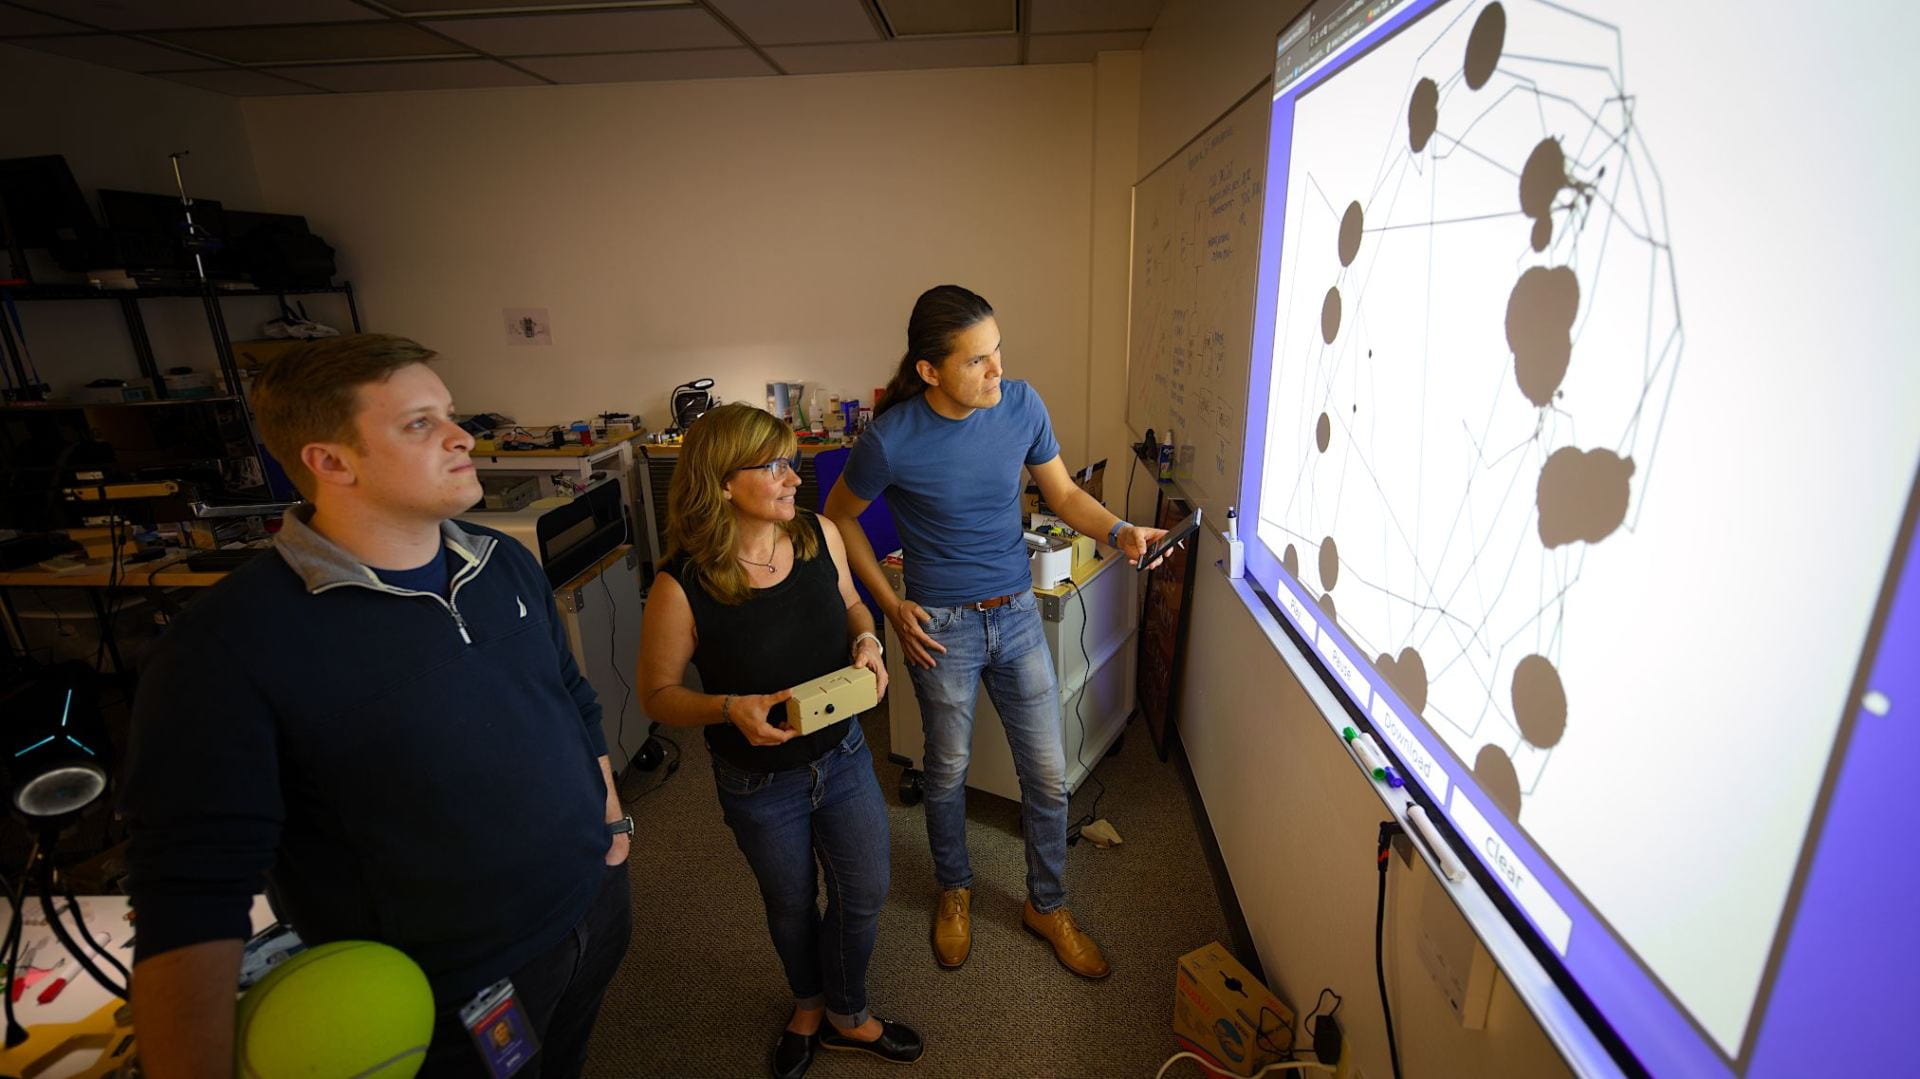 Three people reviewing a data visualization on a projected screen in a lab.